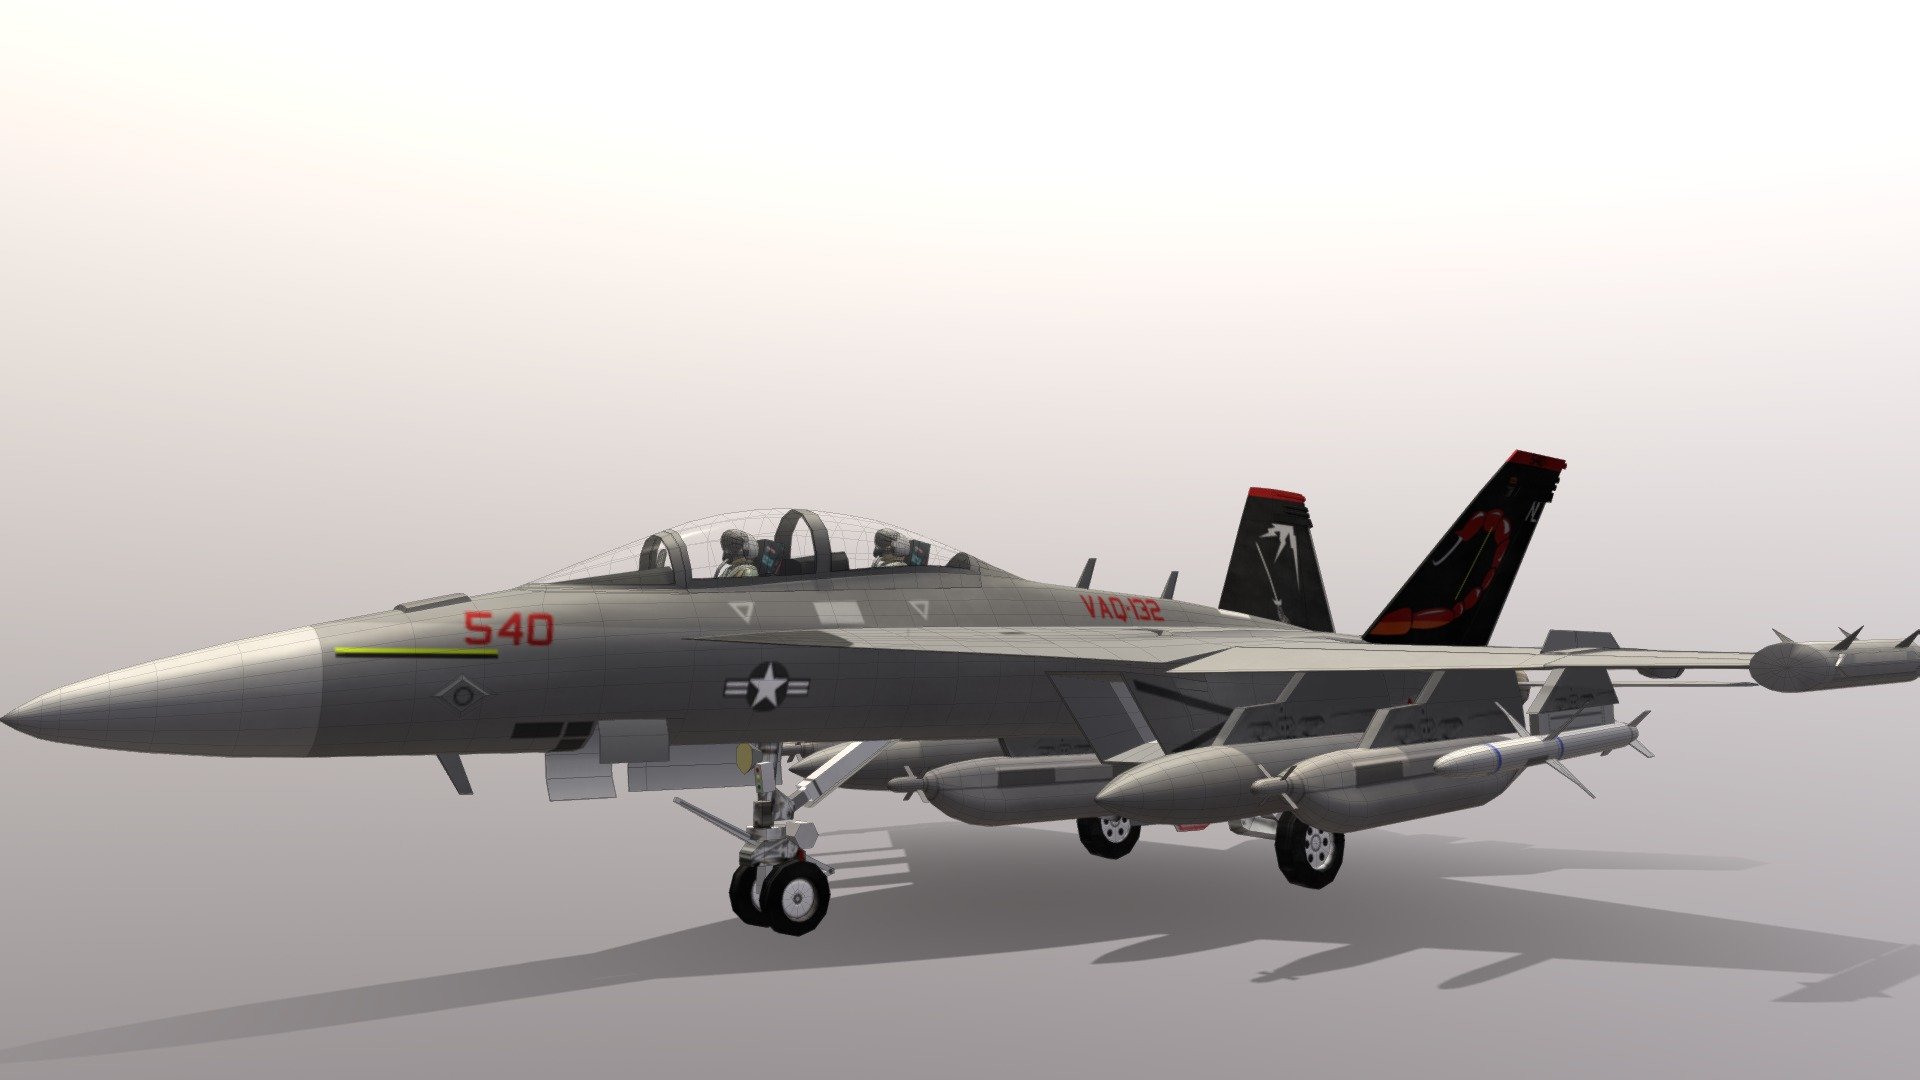 Low poly US NAVY EA-18G Growler model and texture by Yi Tsung Lee (Joe)
Steam Workshop accout: WTigerTw

airframe tris(with EW pod):10621
missiles tris:2184
pilot tris: 5116
canopy tris:252 - Low poly 1:1 EA18G Growler - Download Free 3D model by Yi Tsung Lee (@WTigerTw) 3d model